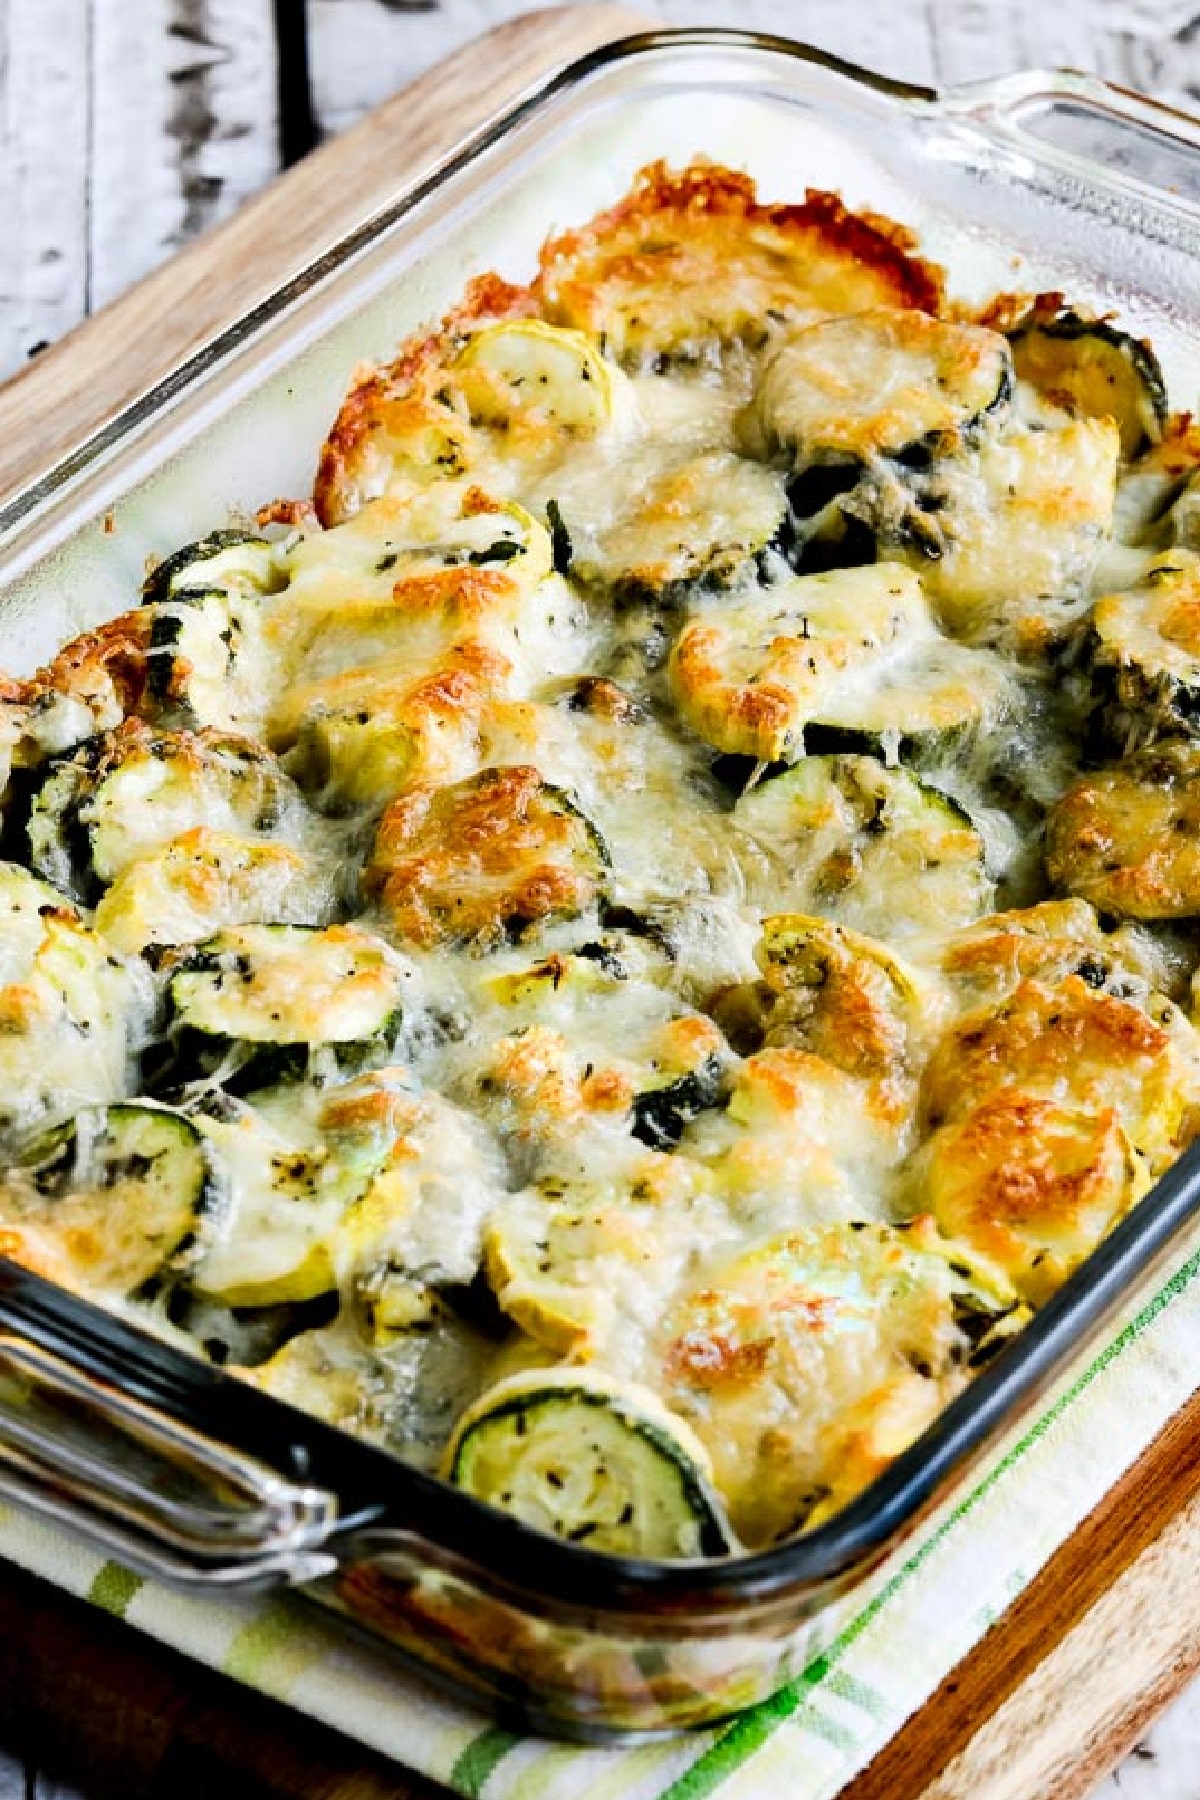 Easy Cheesy Zucchini Bake shown in baking dish with well-browned cheese